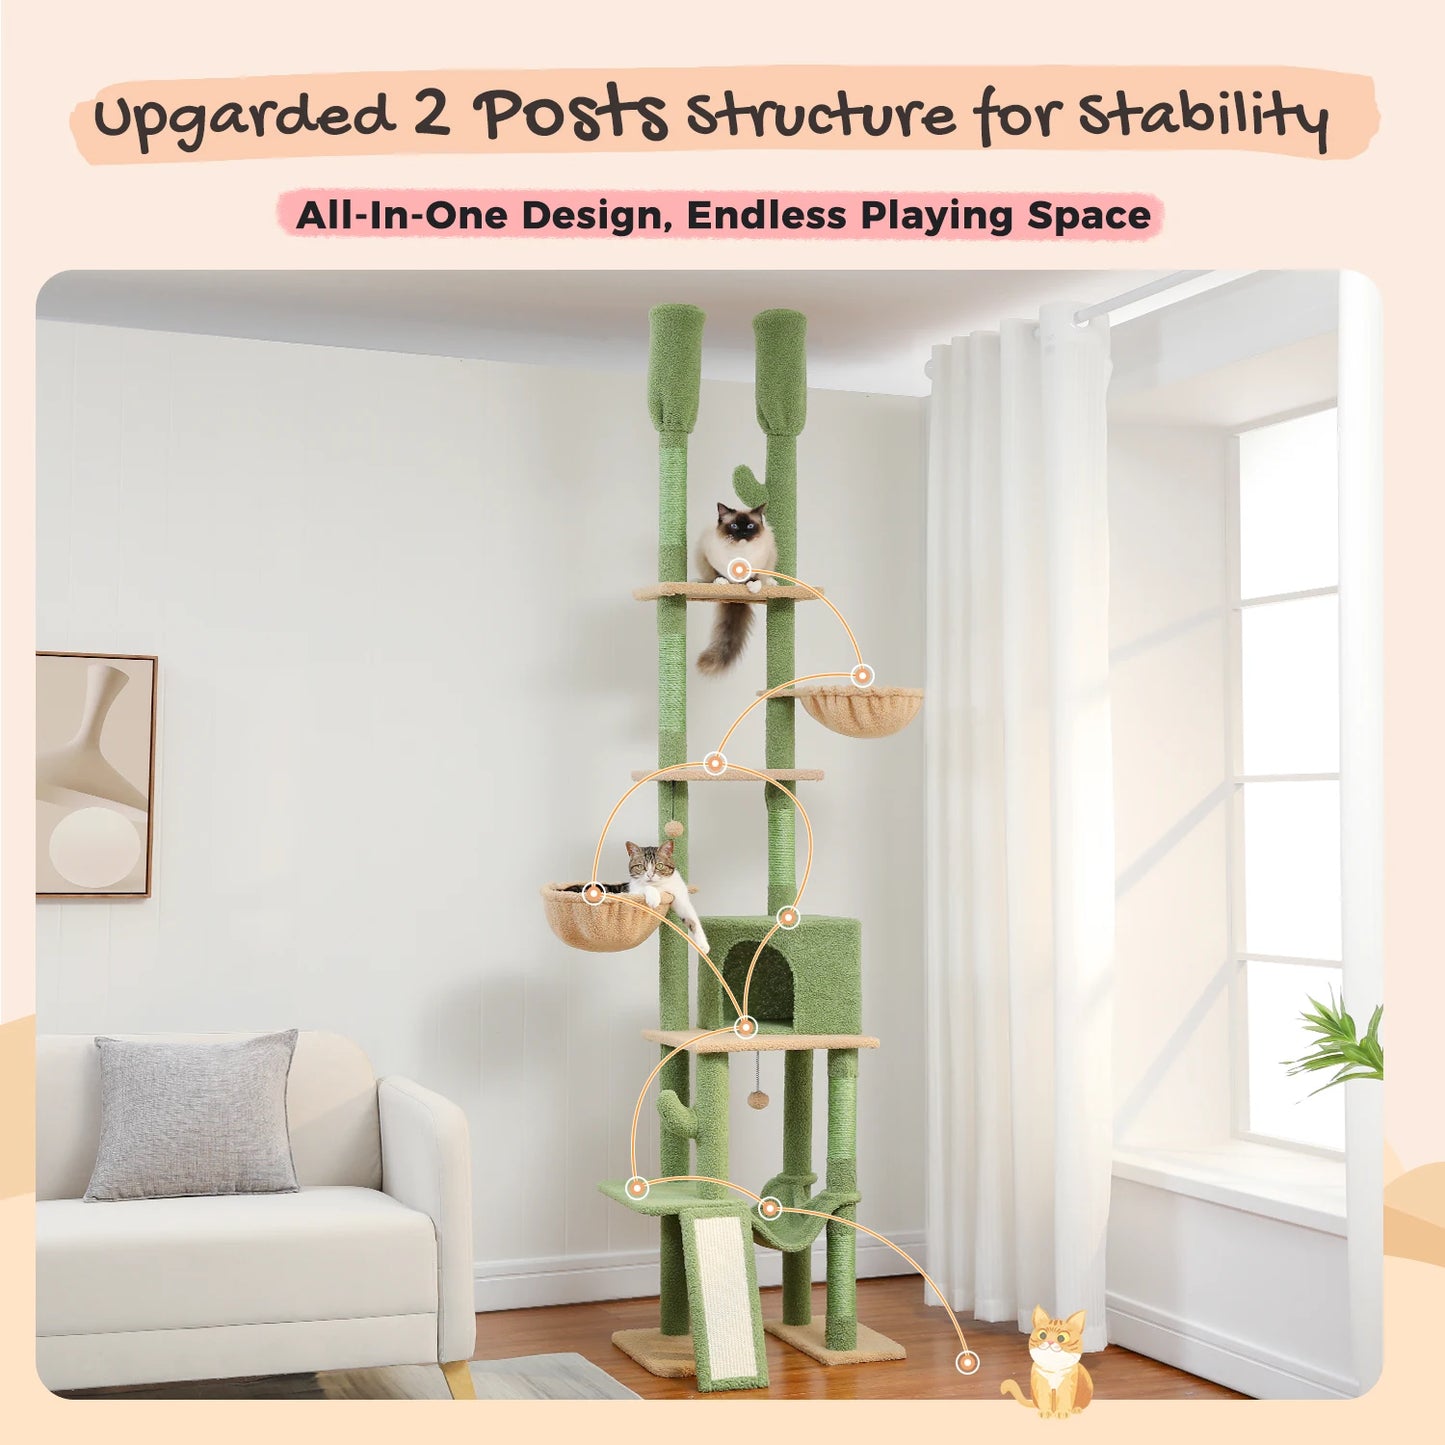 Cactus Cat Tree Floor to Ceiling Cat Tower with Adjustable Height 216-285CM 7 Tiers